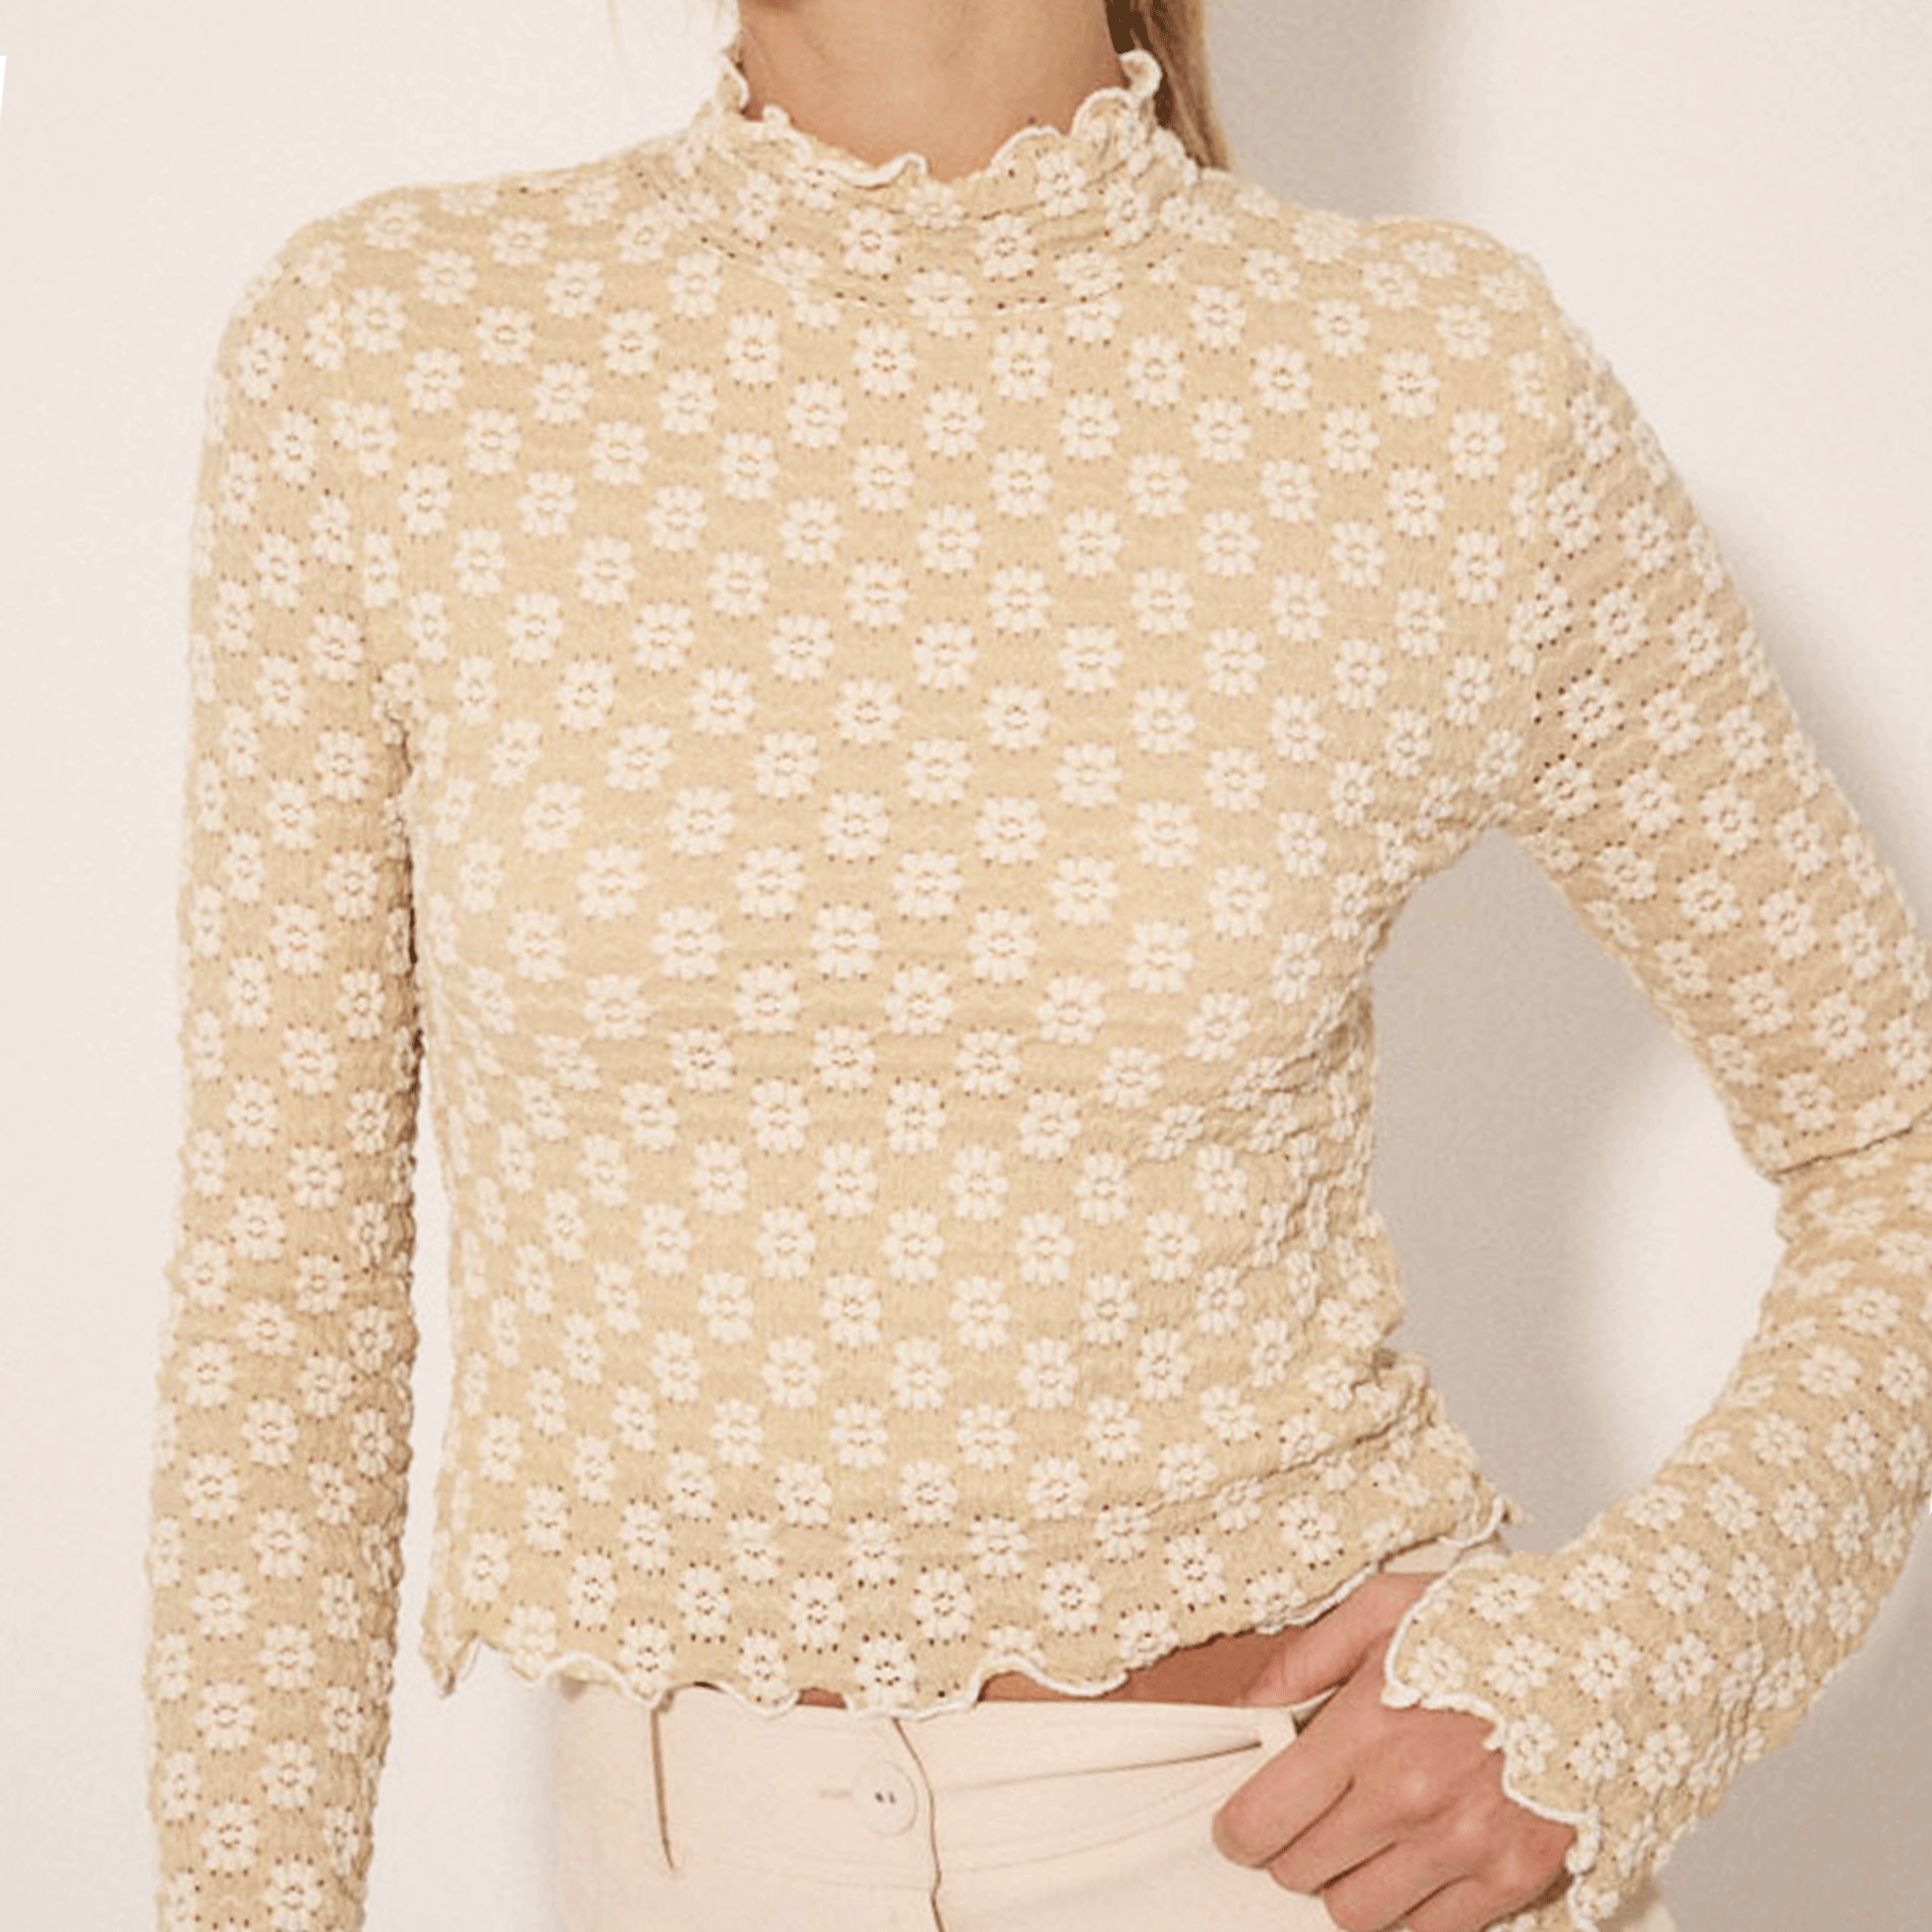 A model wearing a textured ivory top with a floral design and a mock neck that has a subtle ruffle detail.